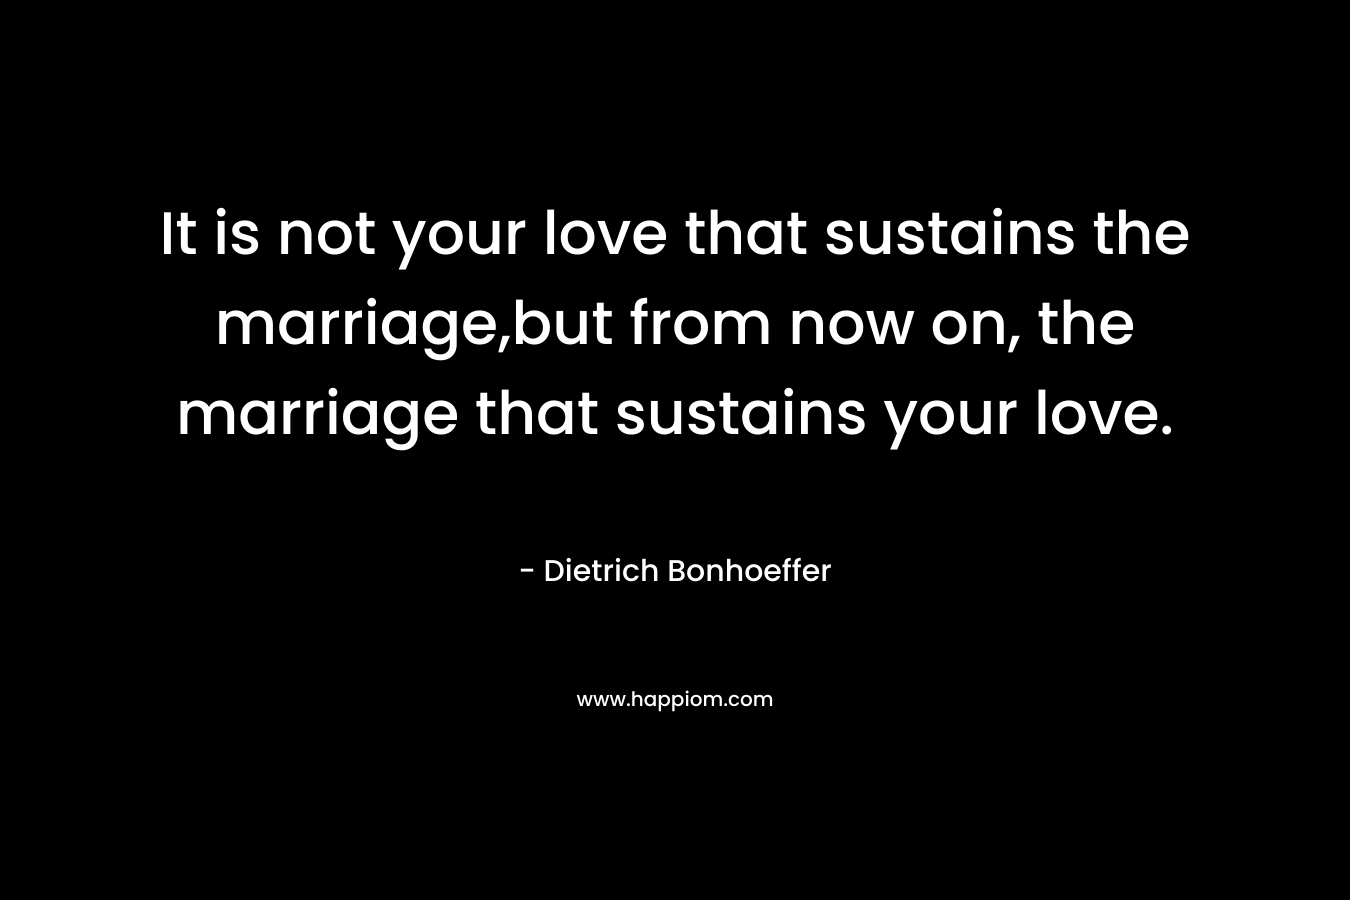 It is not your love that sustains the marriage,but from now on, the marriage that sustains your love.